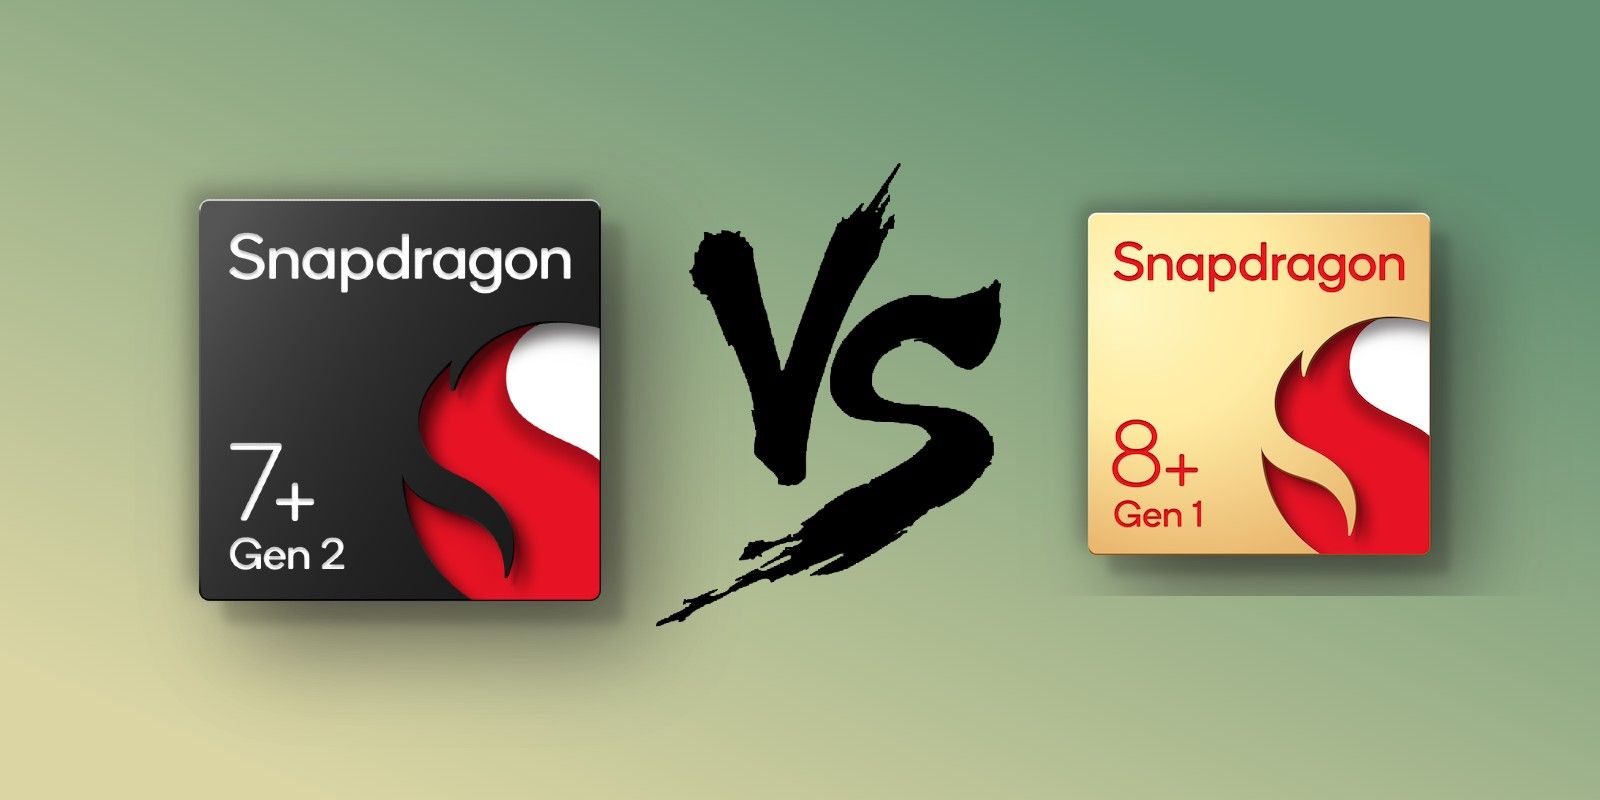 Snapdragon 4 Gen 2 goes official: 4nm chip with 120Hz display